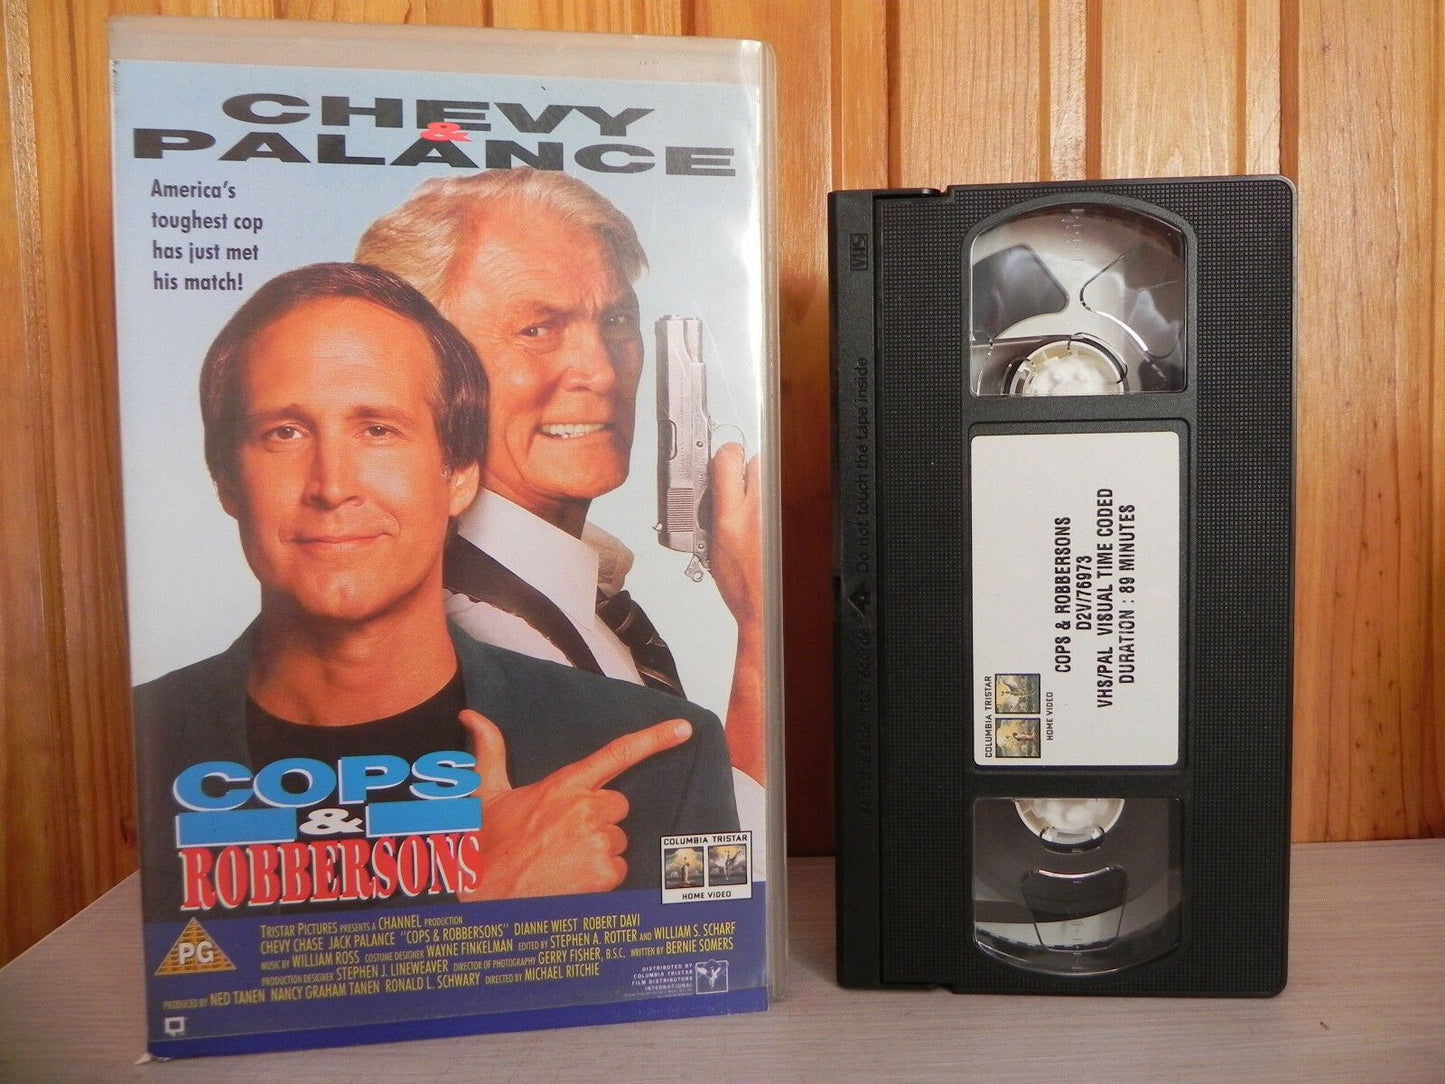 Cops And Robbersons - Sample Copy - LargeBox - Action Comedy - Chevy Chase - Pal VHS-